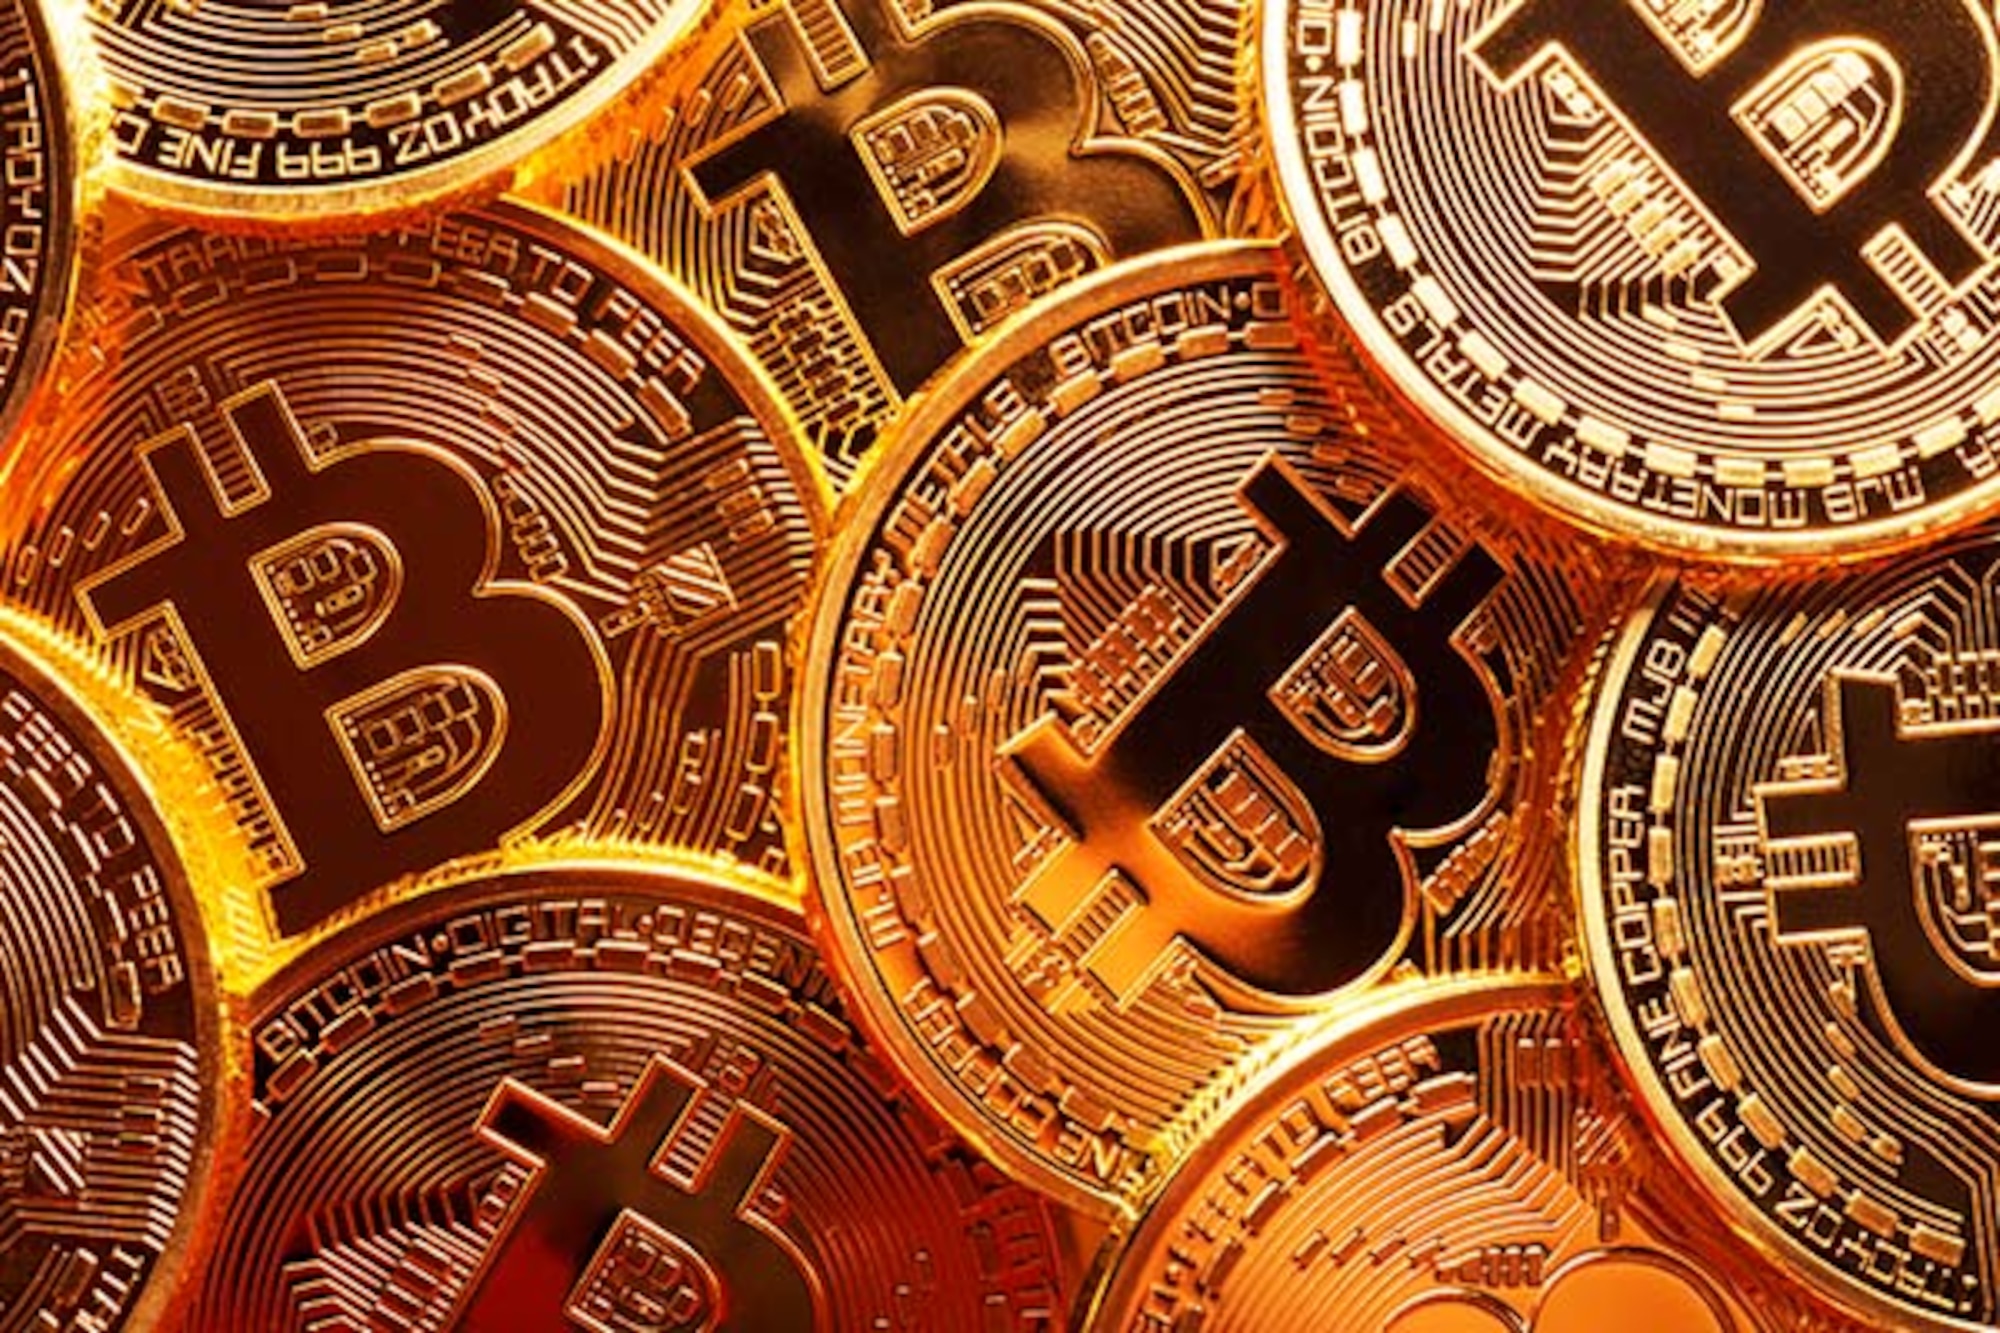 Close-up photo of several gold plated bitcoins together symbolizing the bitcoin market.